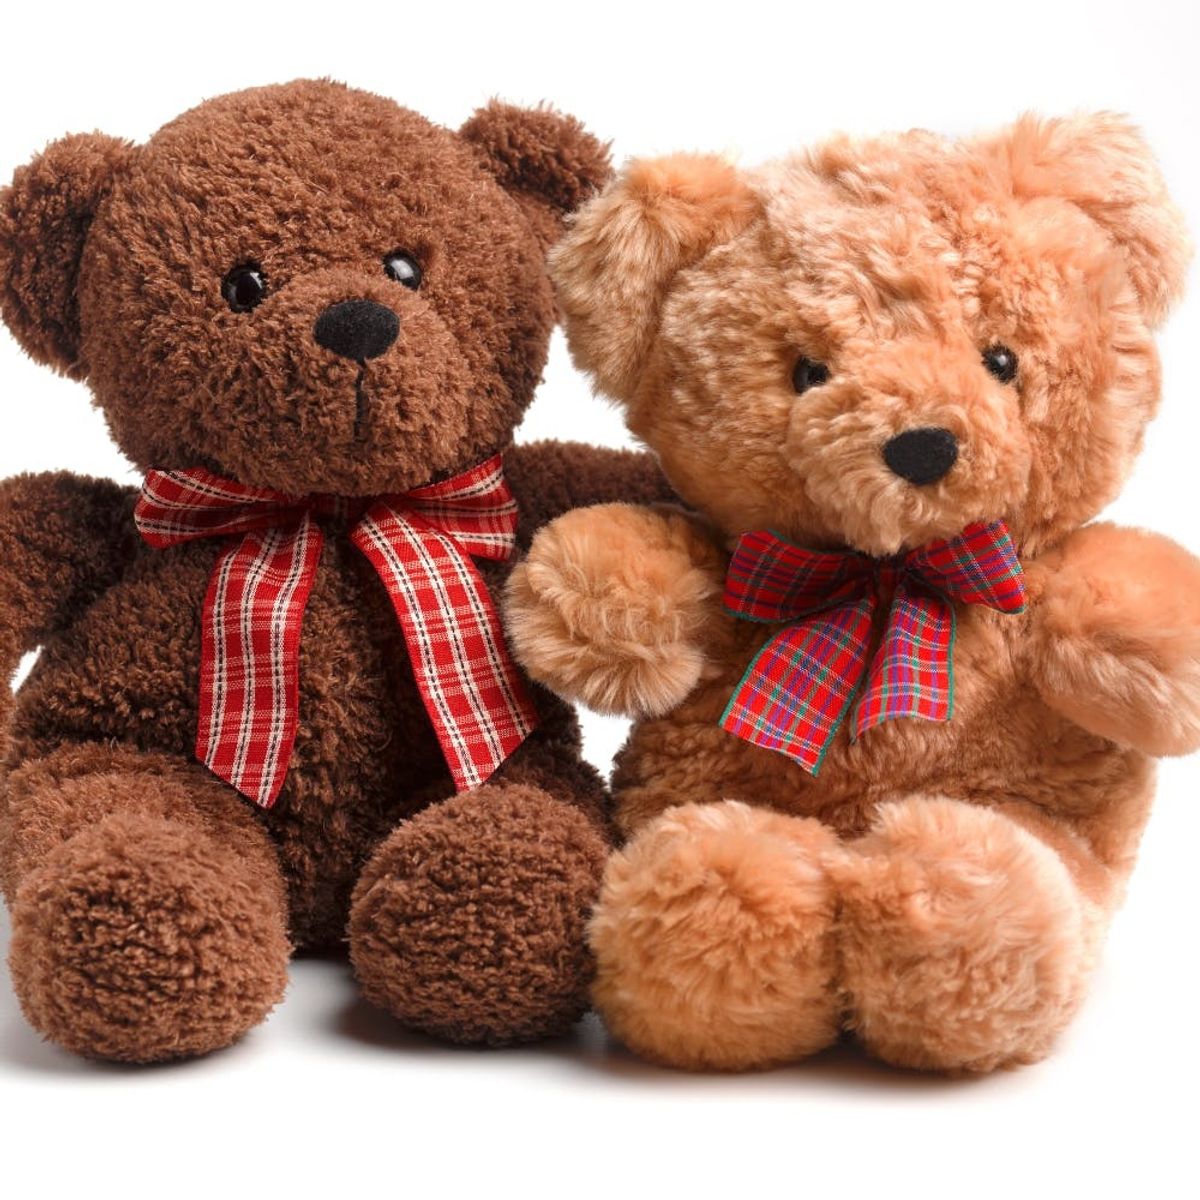 Two Little Girls Get Teddy Bears With Their Late Grandpa’s Voice